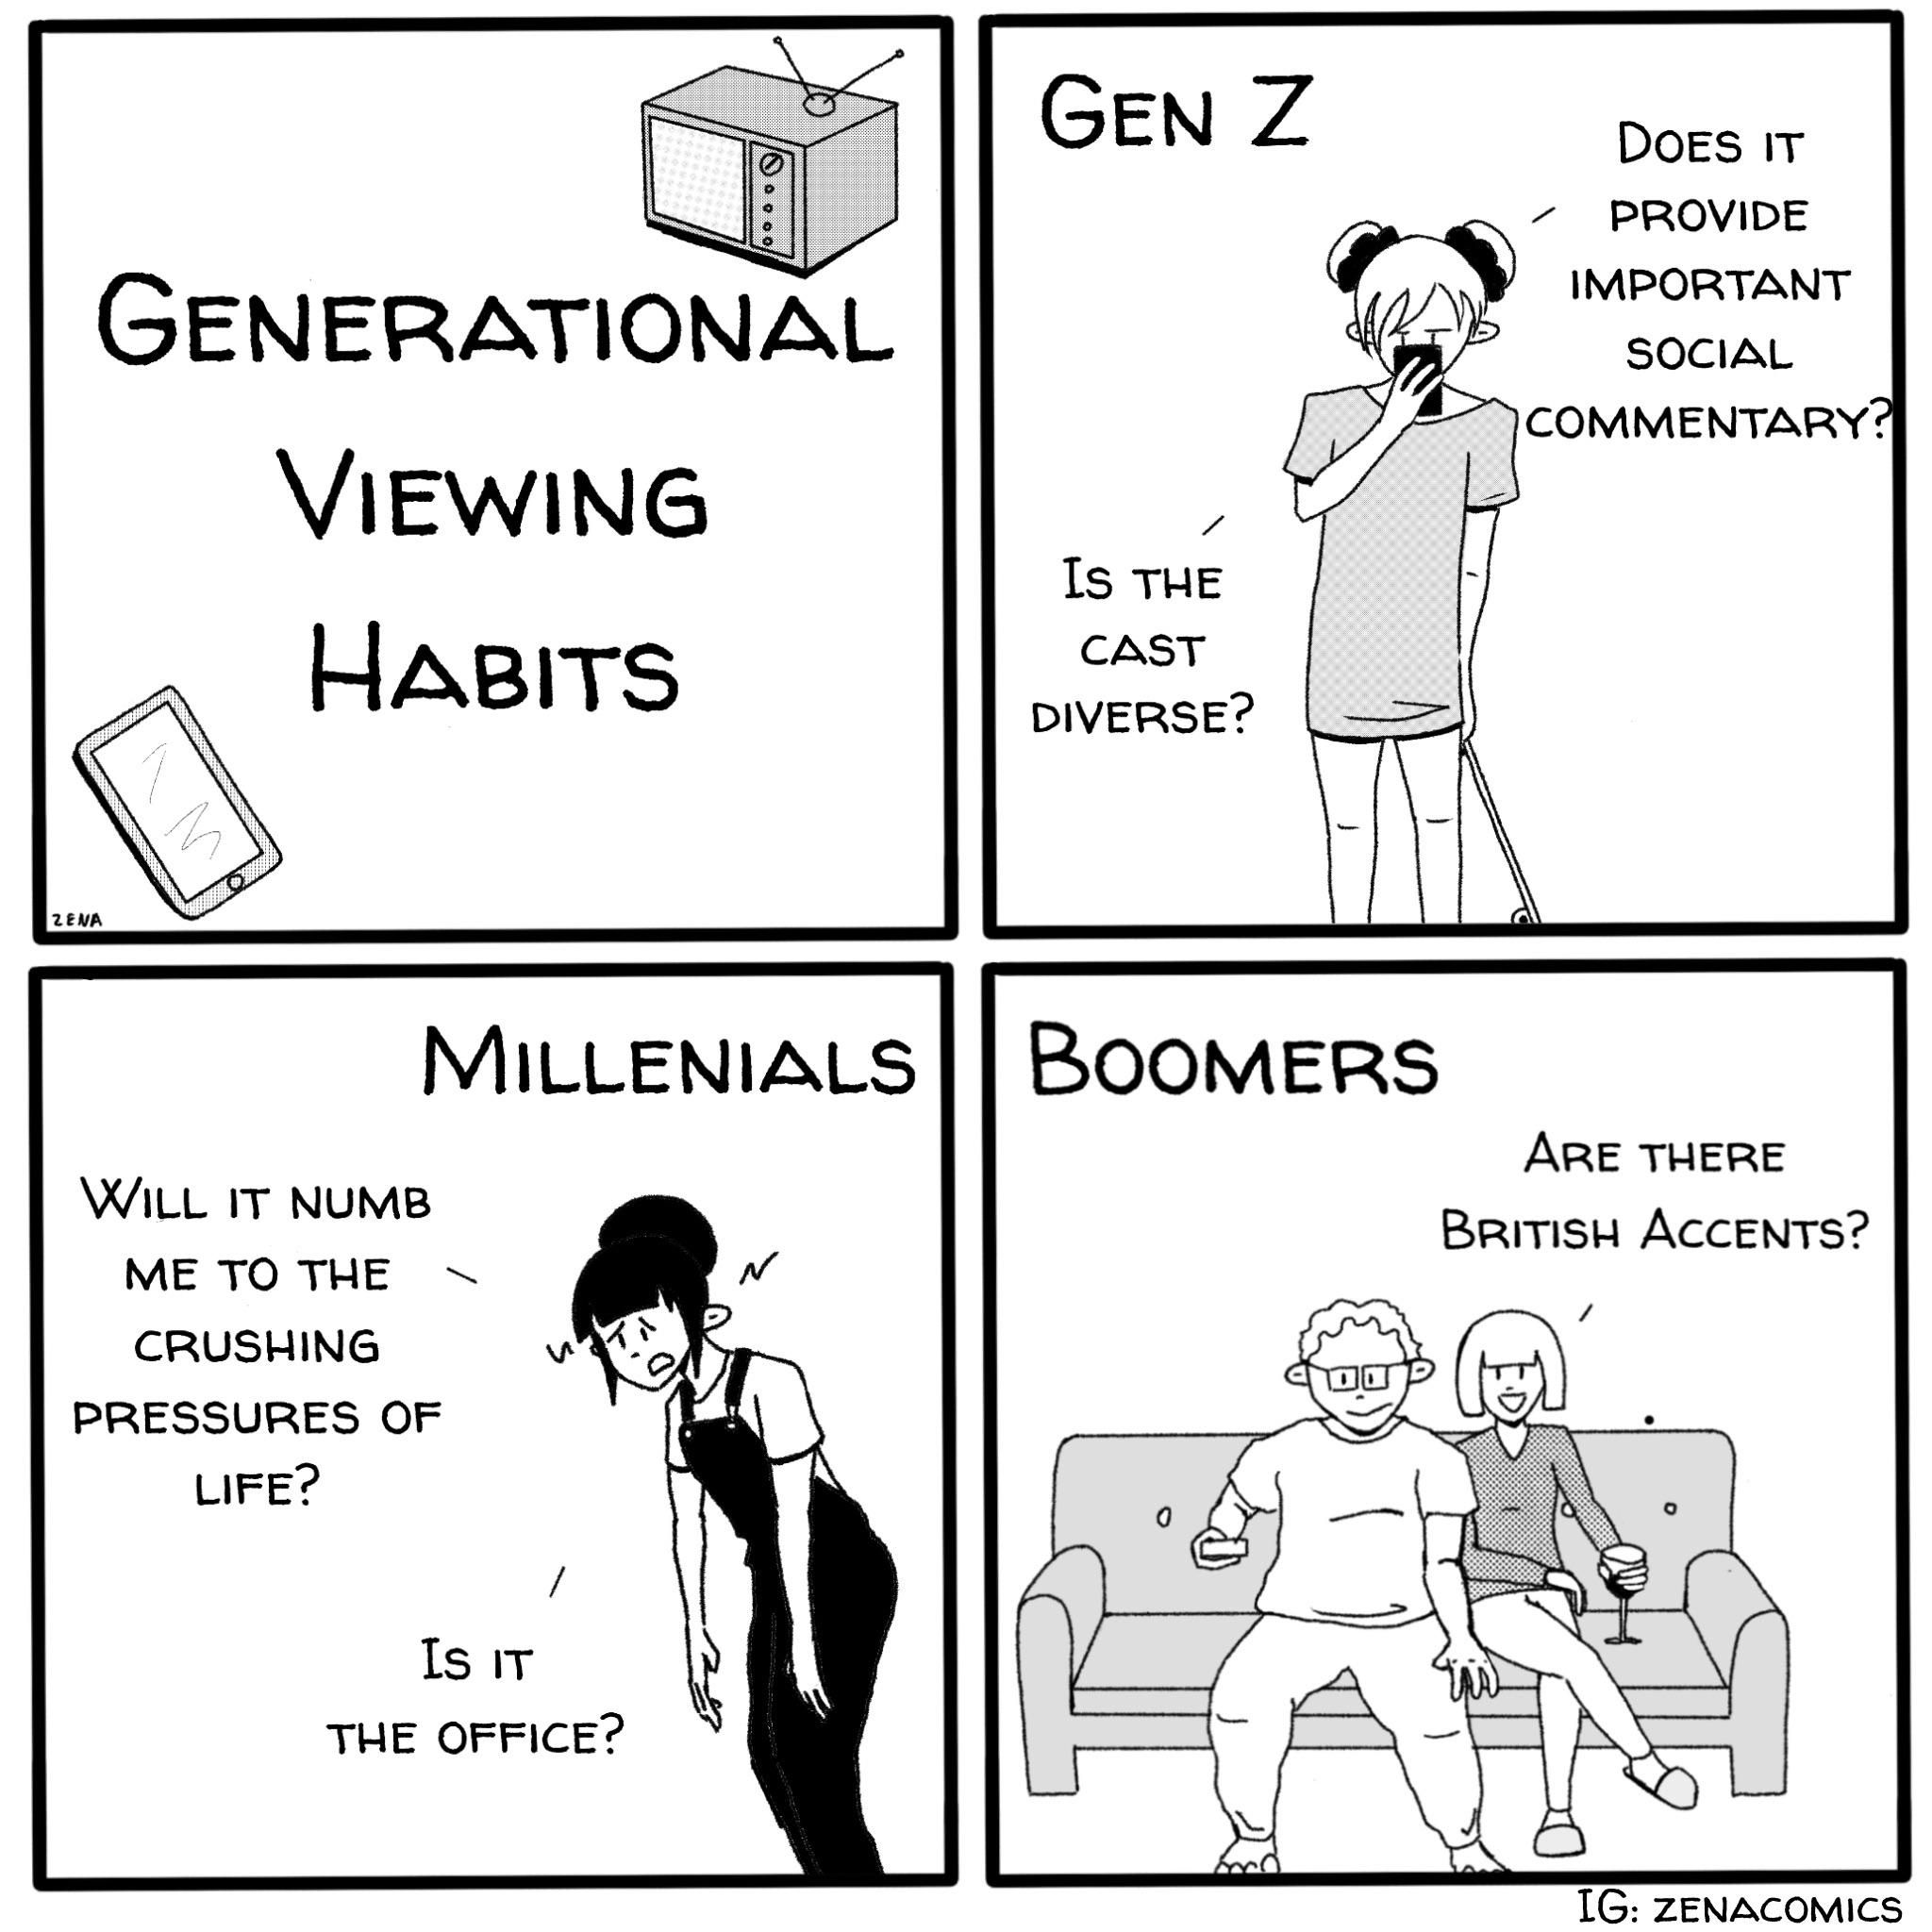 Apologies to Gen Z, but I have no idea what you all watch